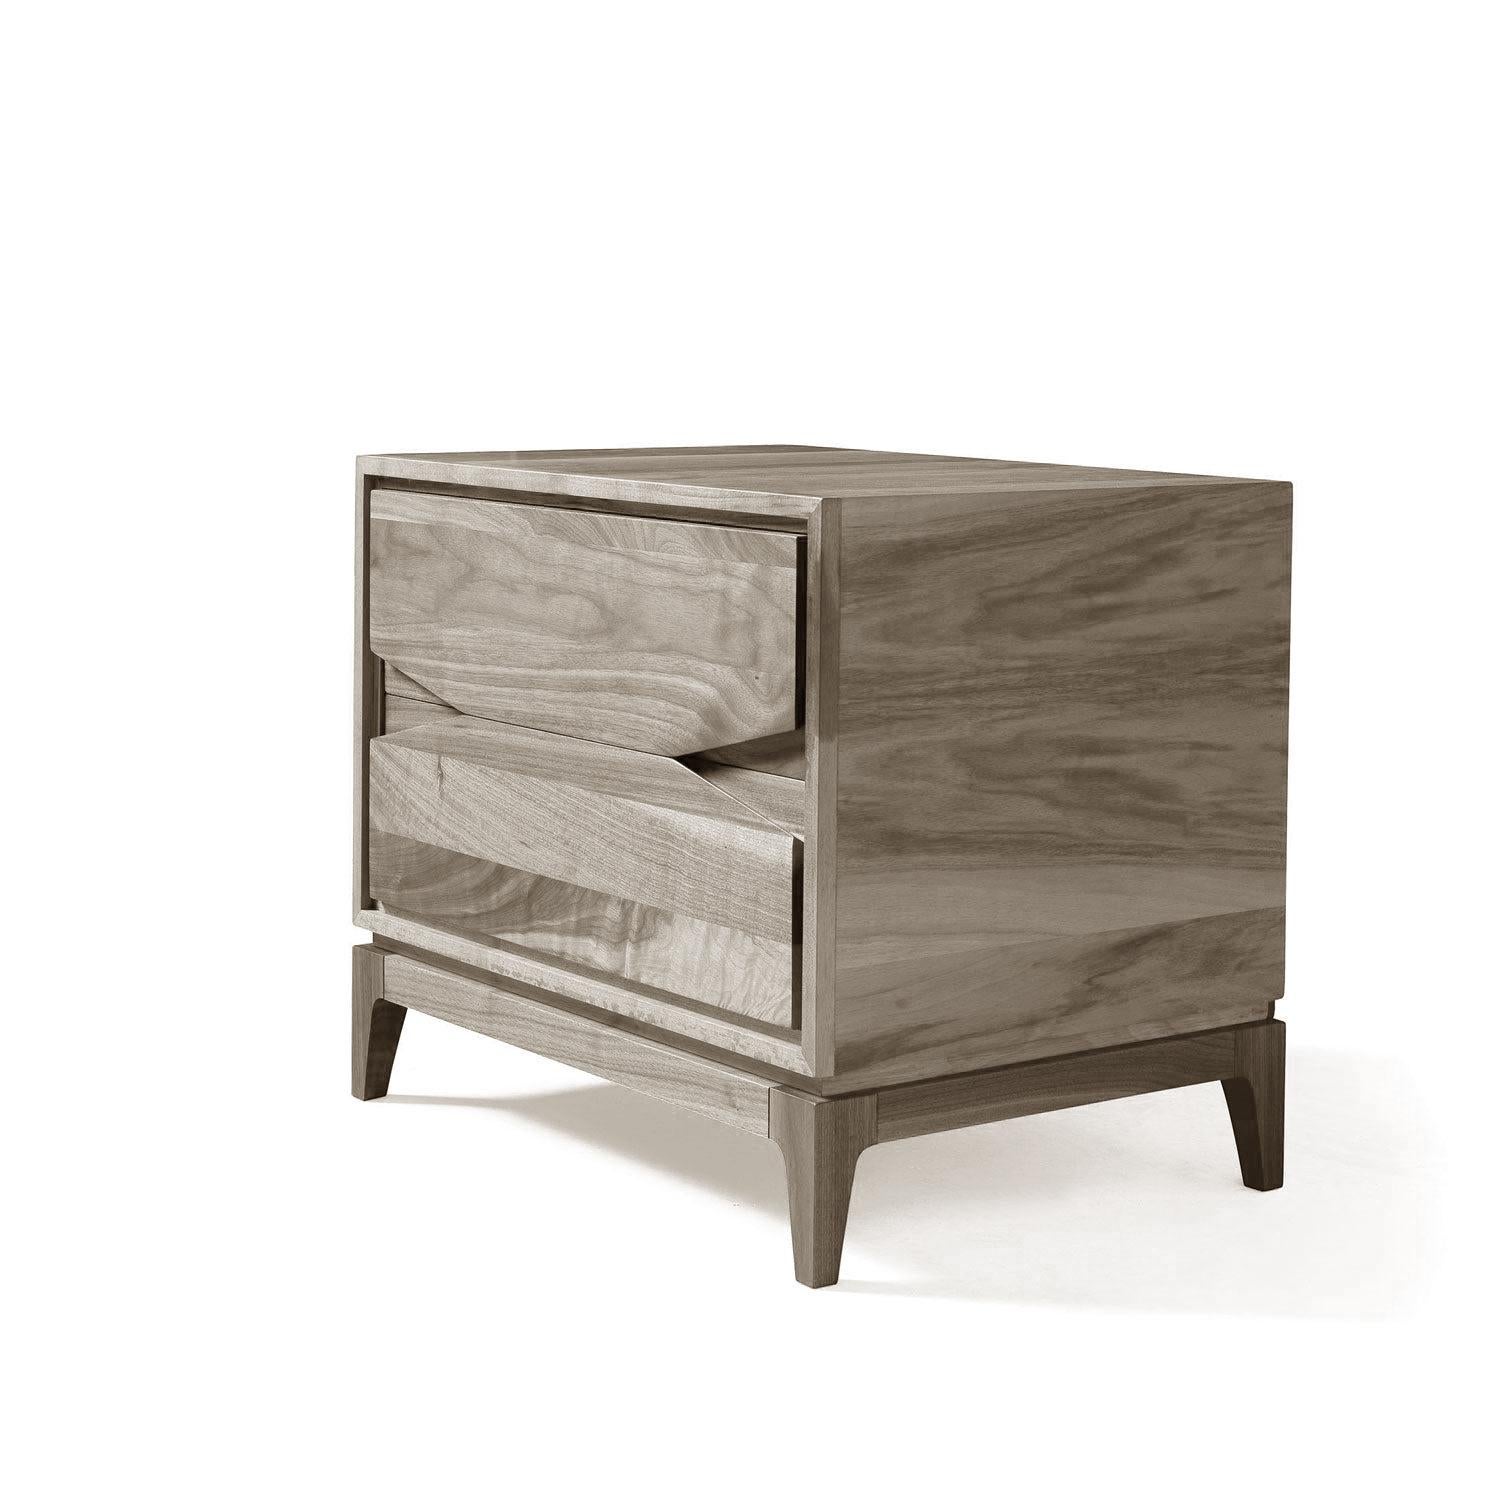 The Base solid wood bedside tables are made in Italy by expert hands with top quality solid walnut. Their linear simplicity makes them suitable for any contemporary interior, while the robust design guarantee maximum durability. Being handmade, they